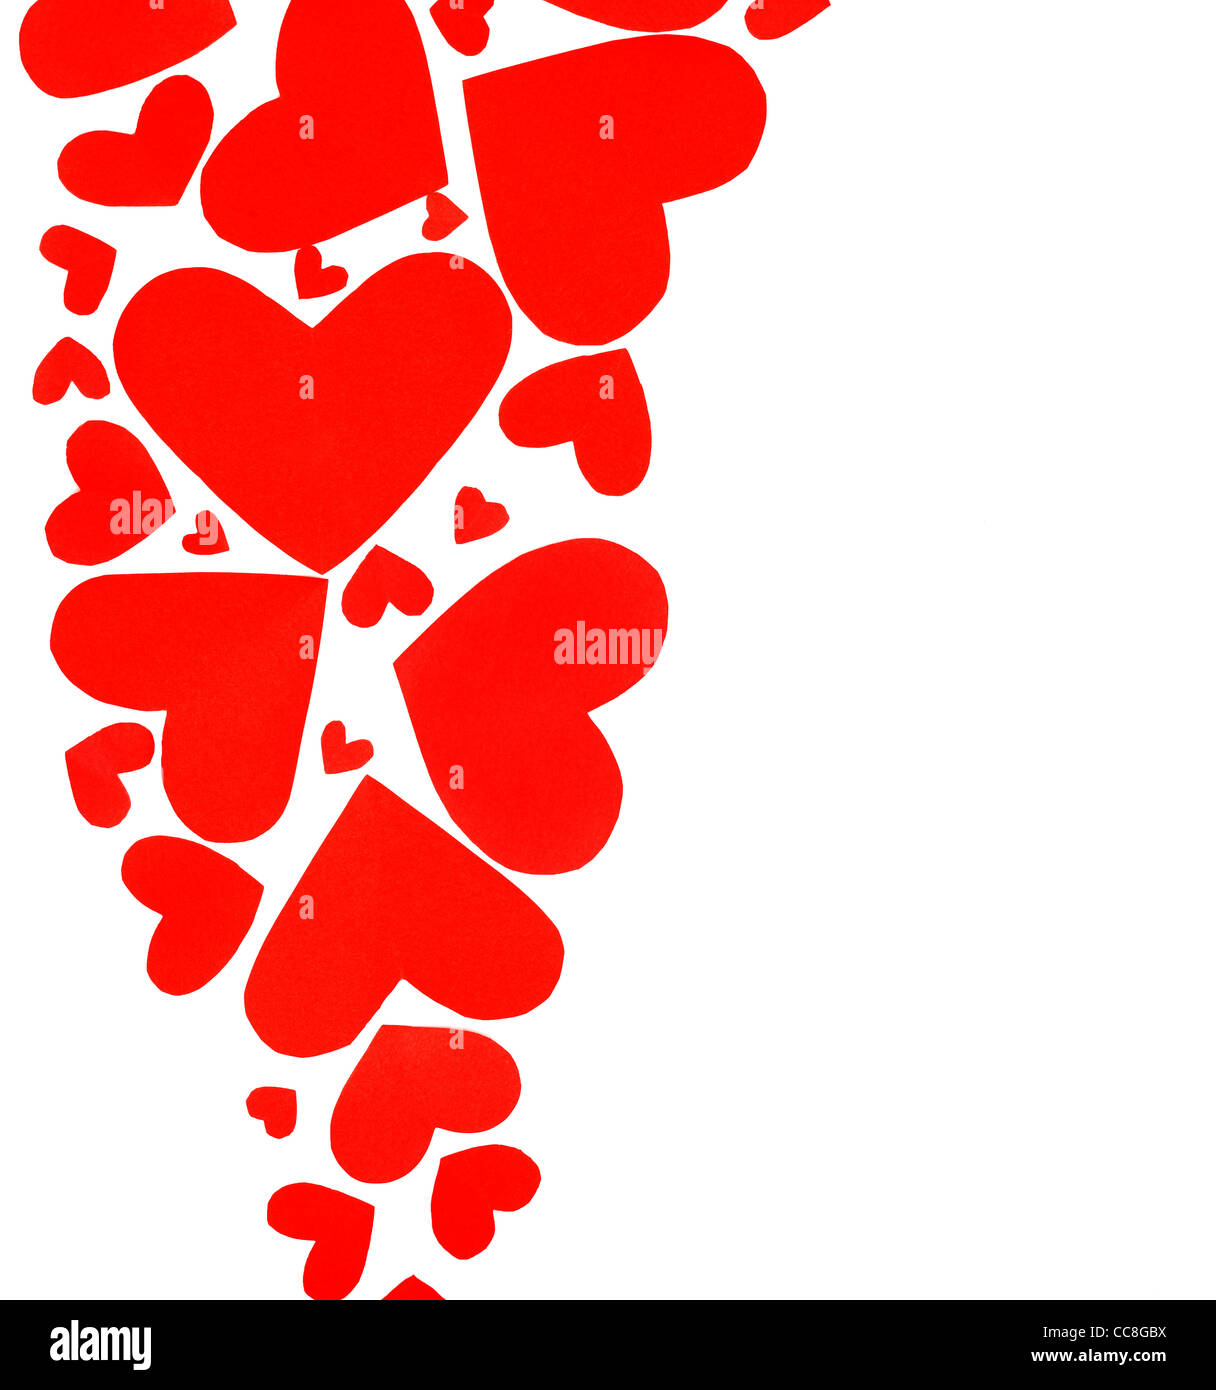 Many Red Hearts Cut Out From Paper On White Background Stock Photo, Picture  and Royalty Free Image. Image 61483927.